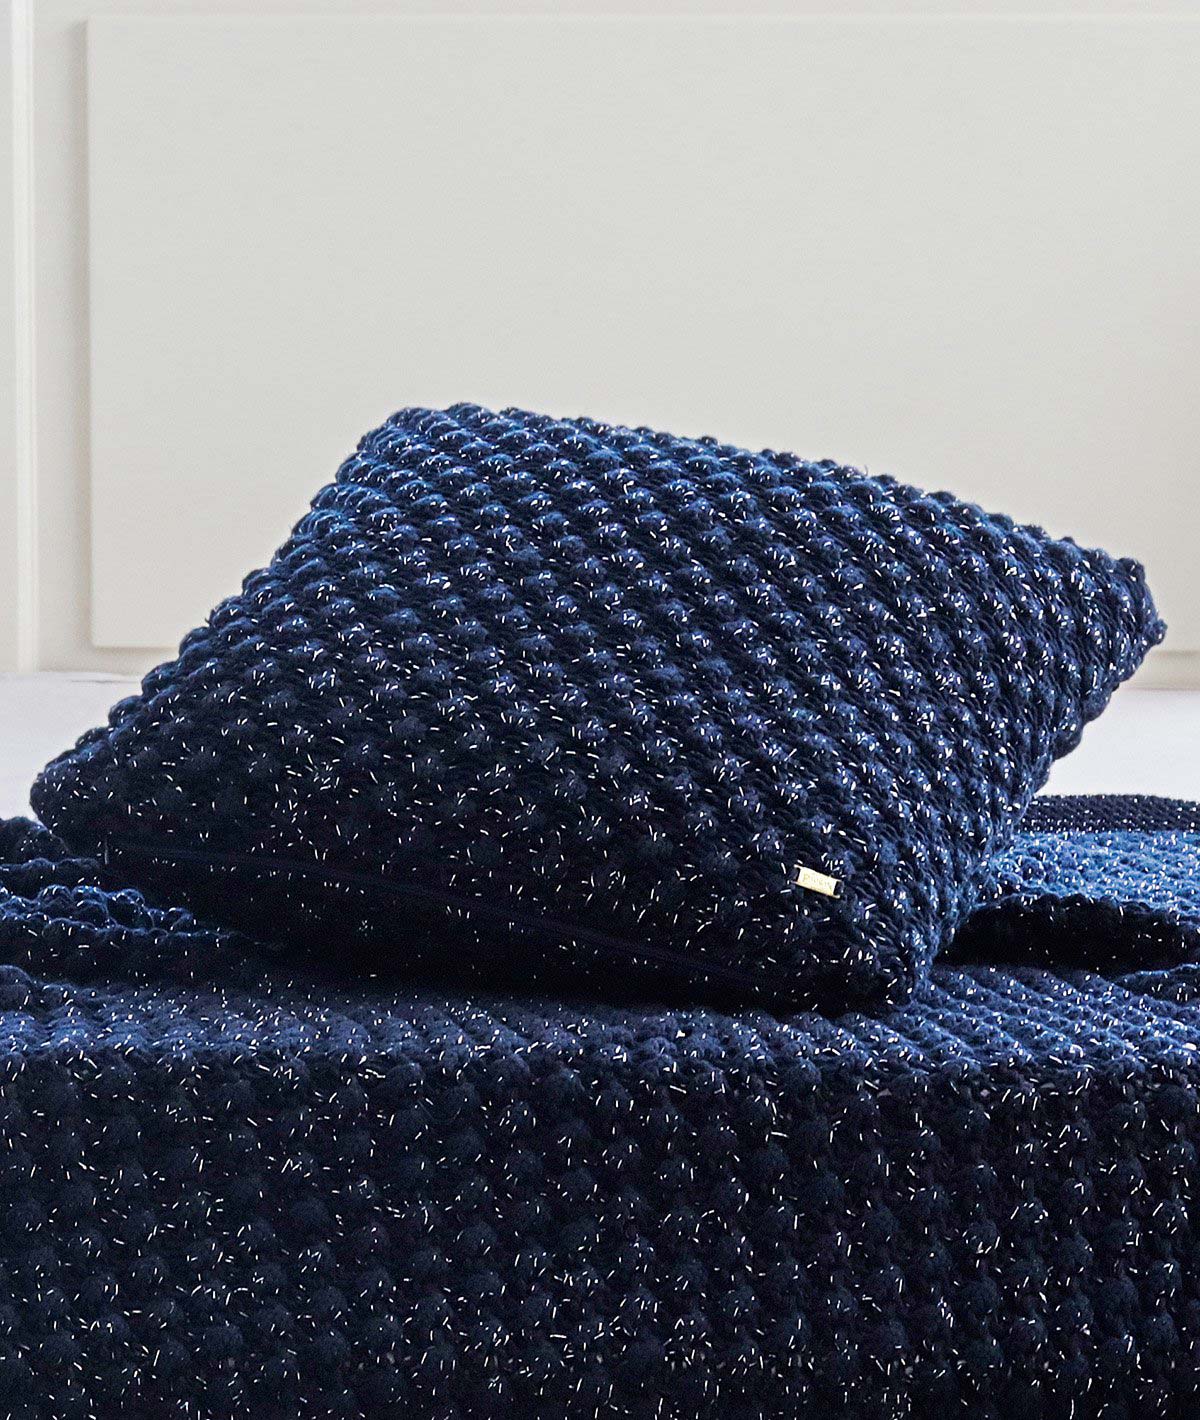 Popcorn Cotton Knitted Decorative Navy Color With Silver Lurex 18 x 18 Inches Cushion Cover